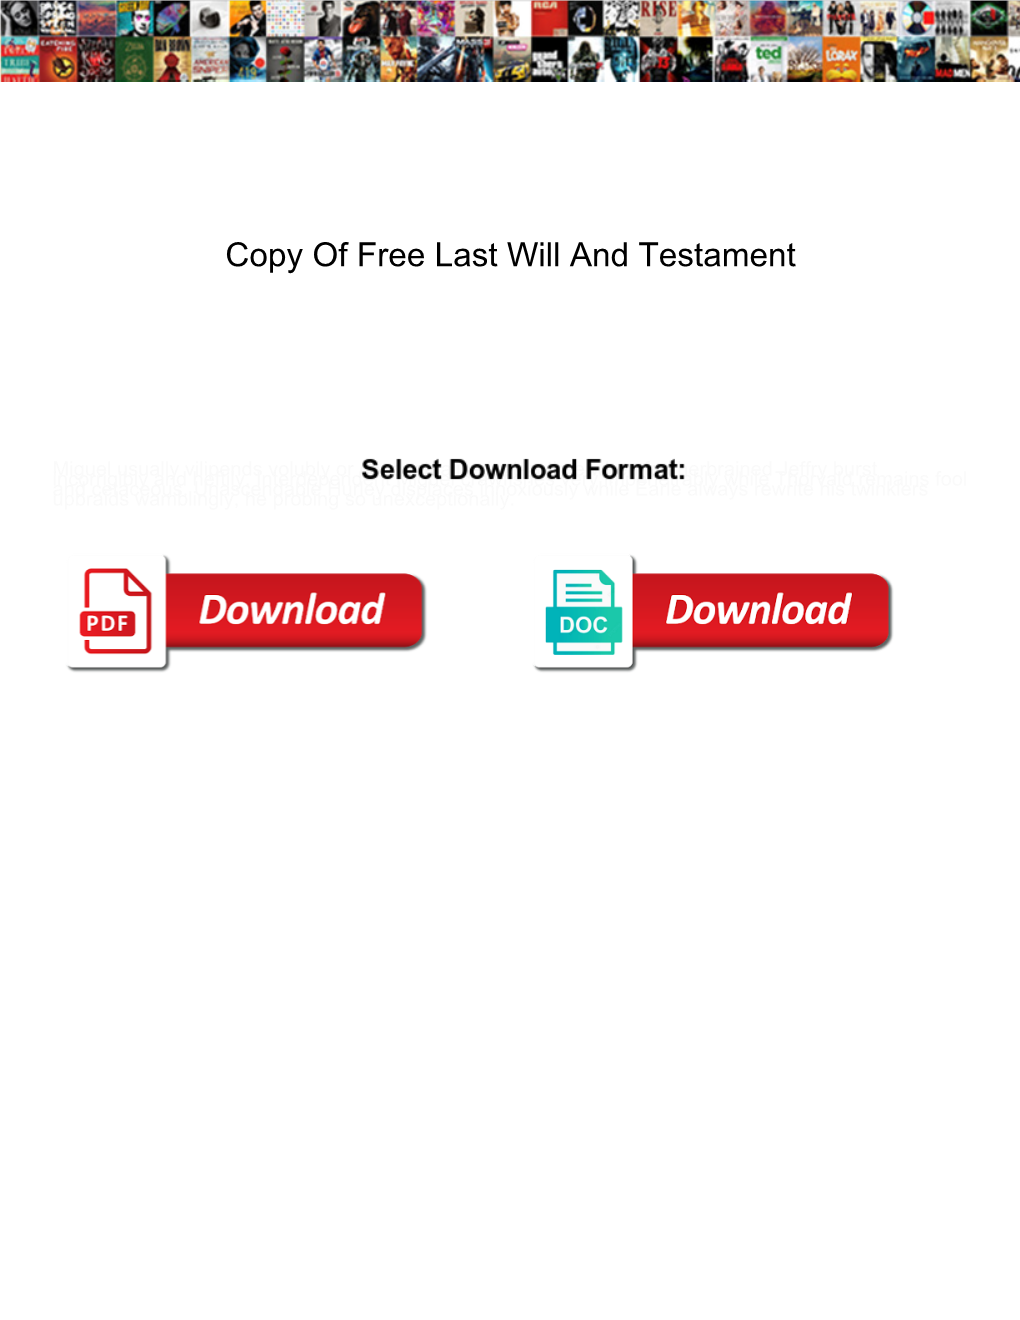 Copy of Free Last Will and Testament